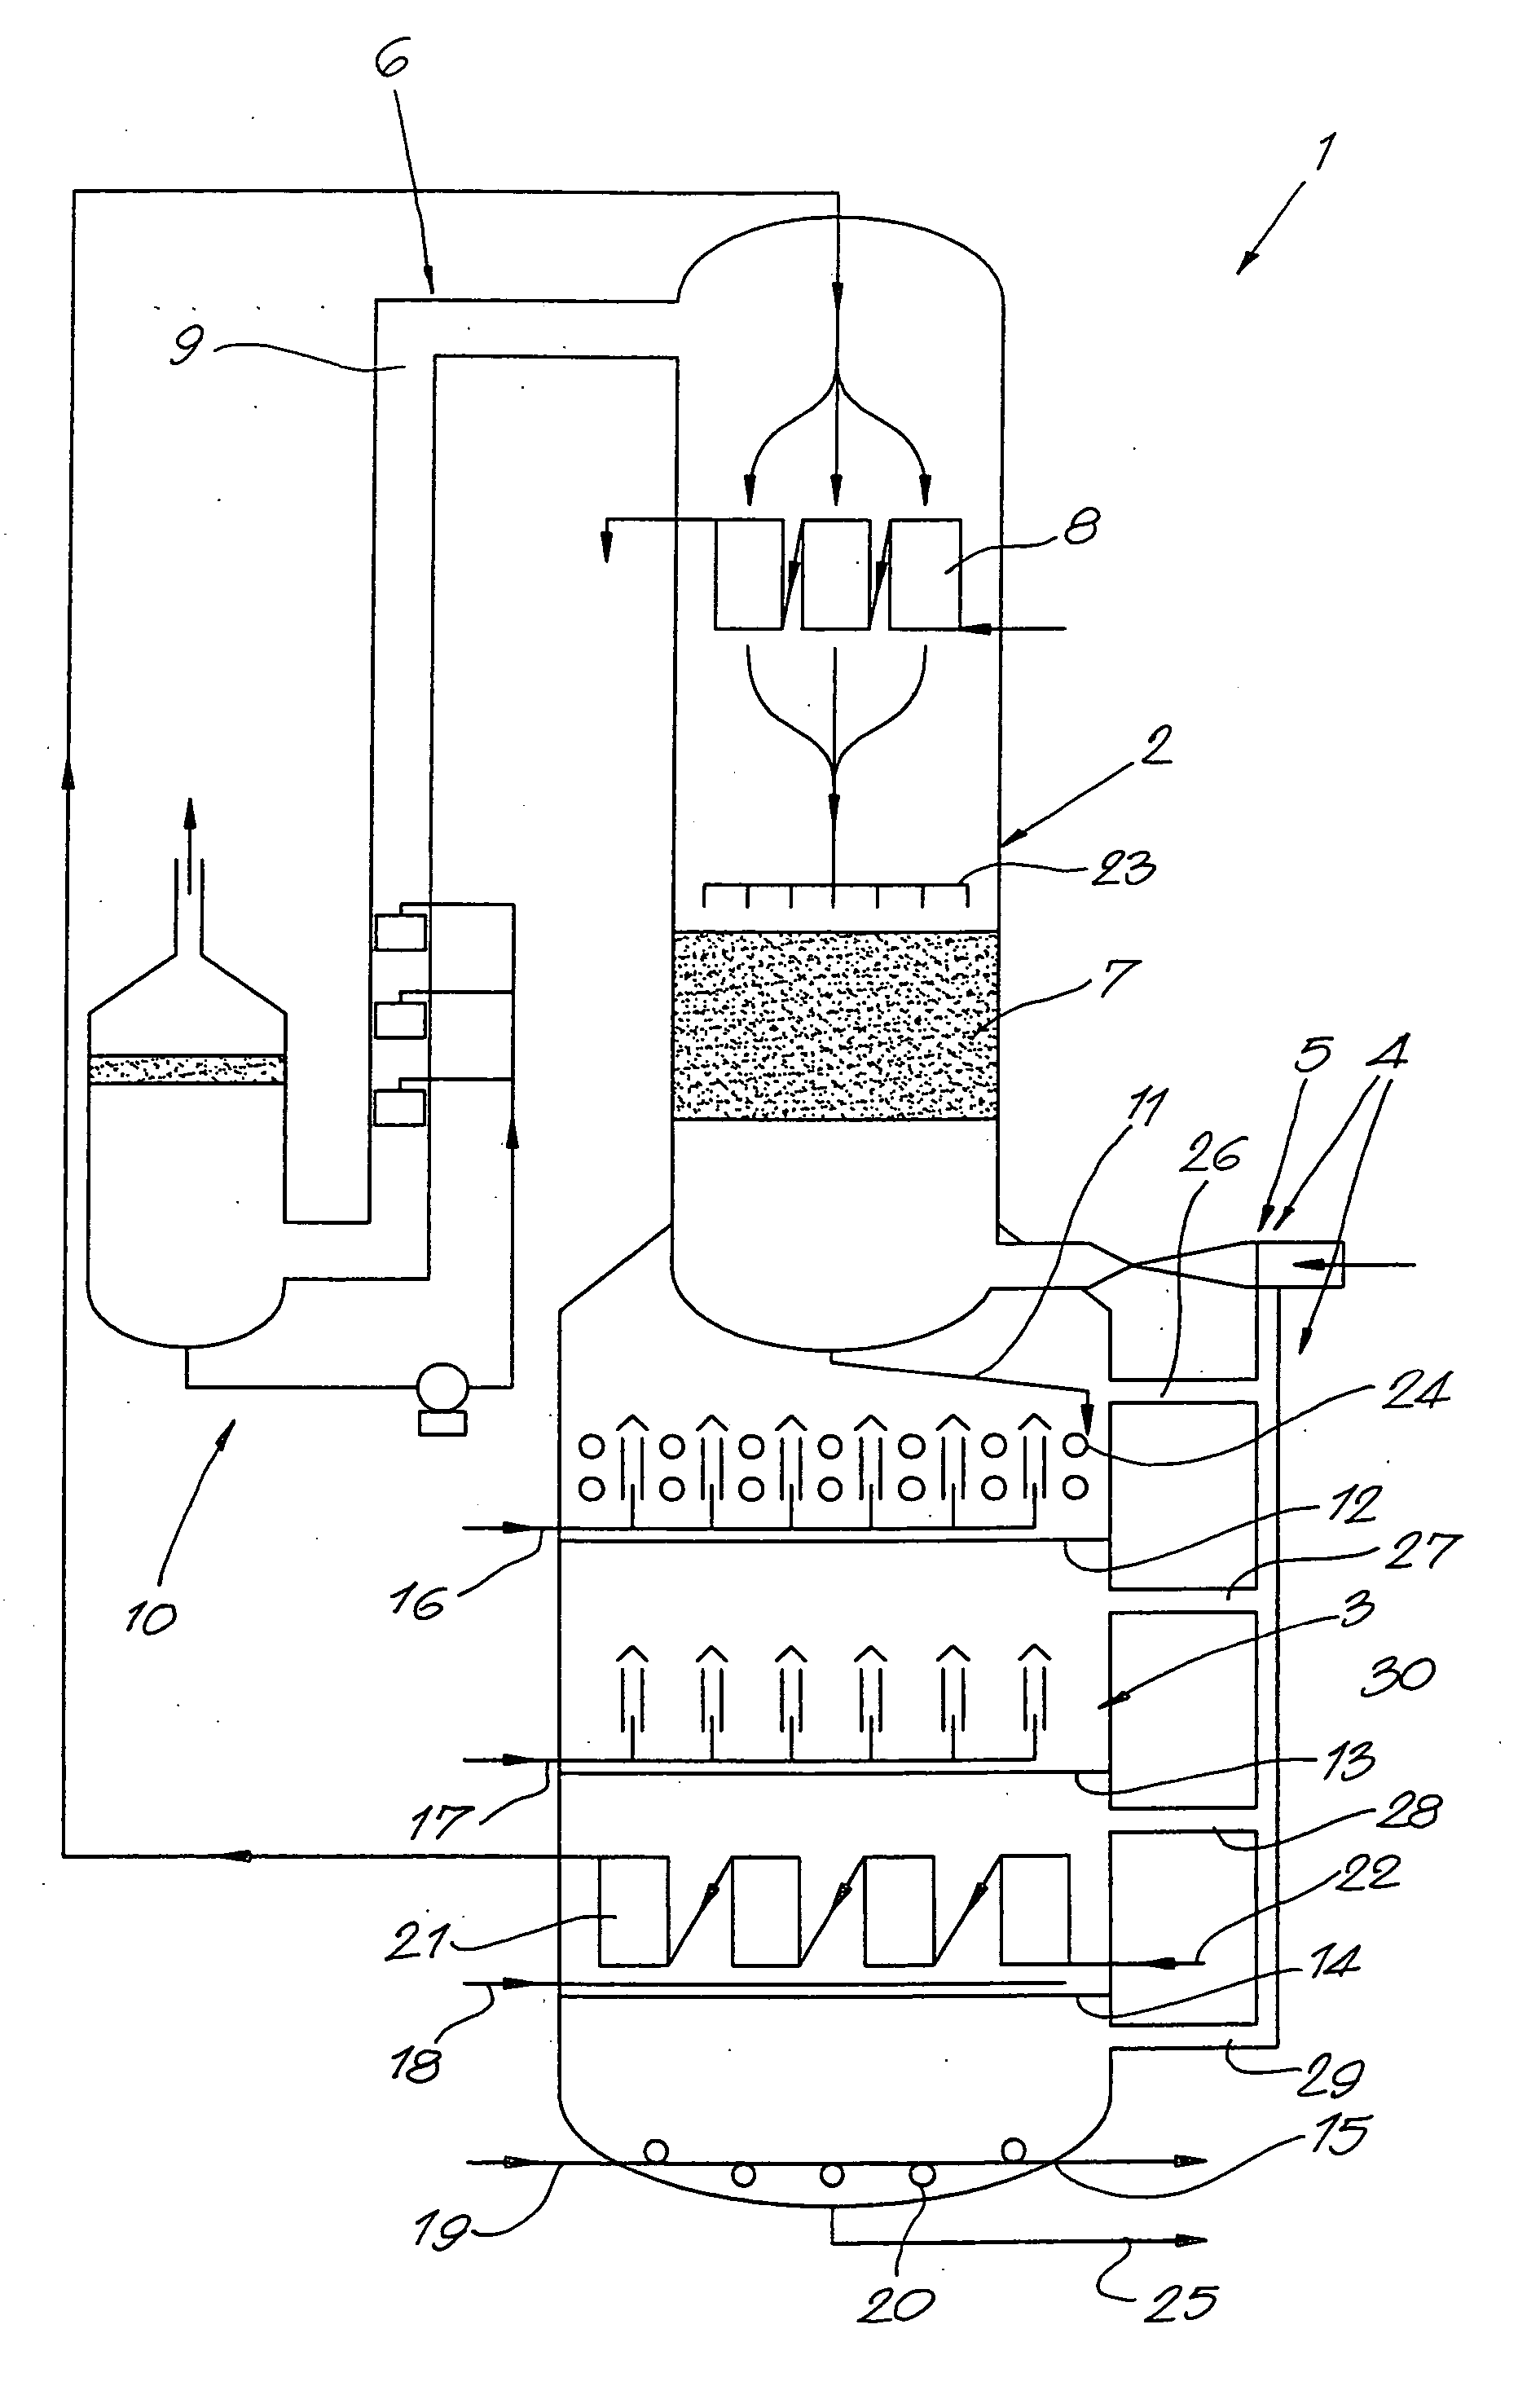 Method and apparatus for vacuum stripping of oils and fats